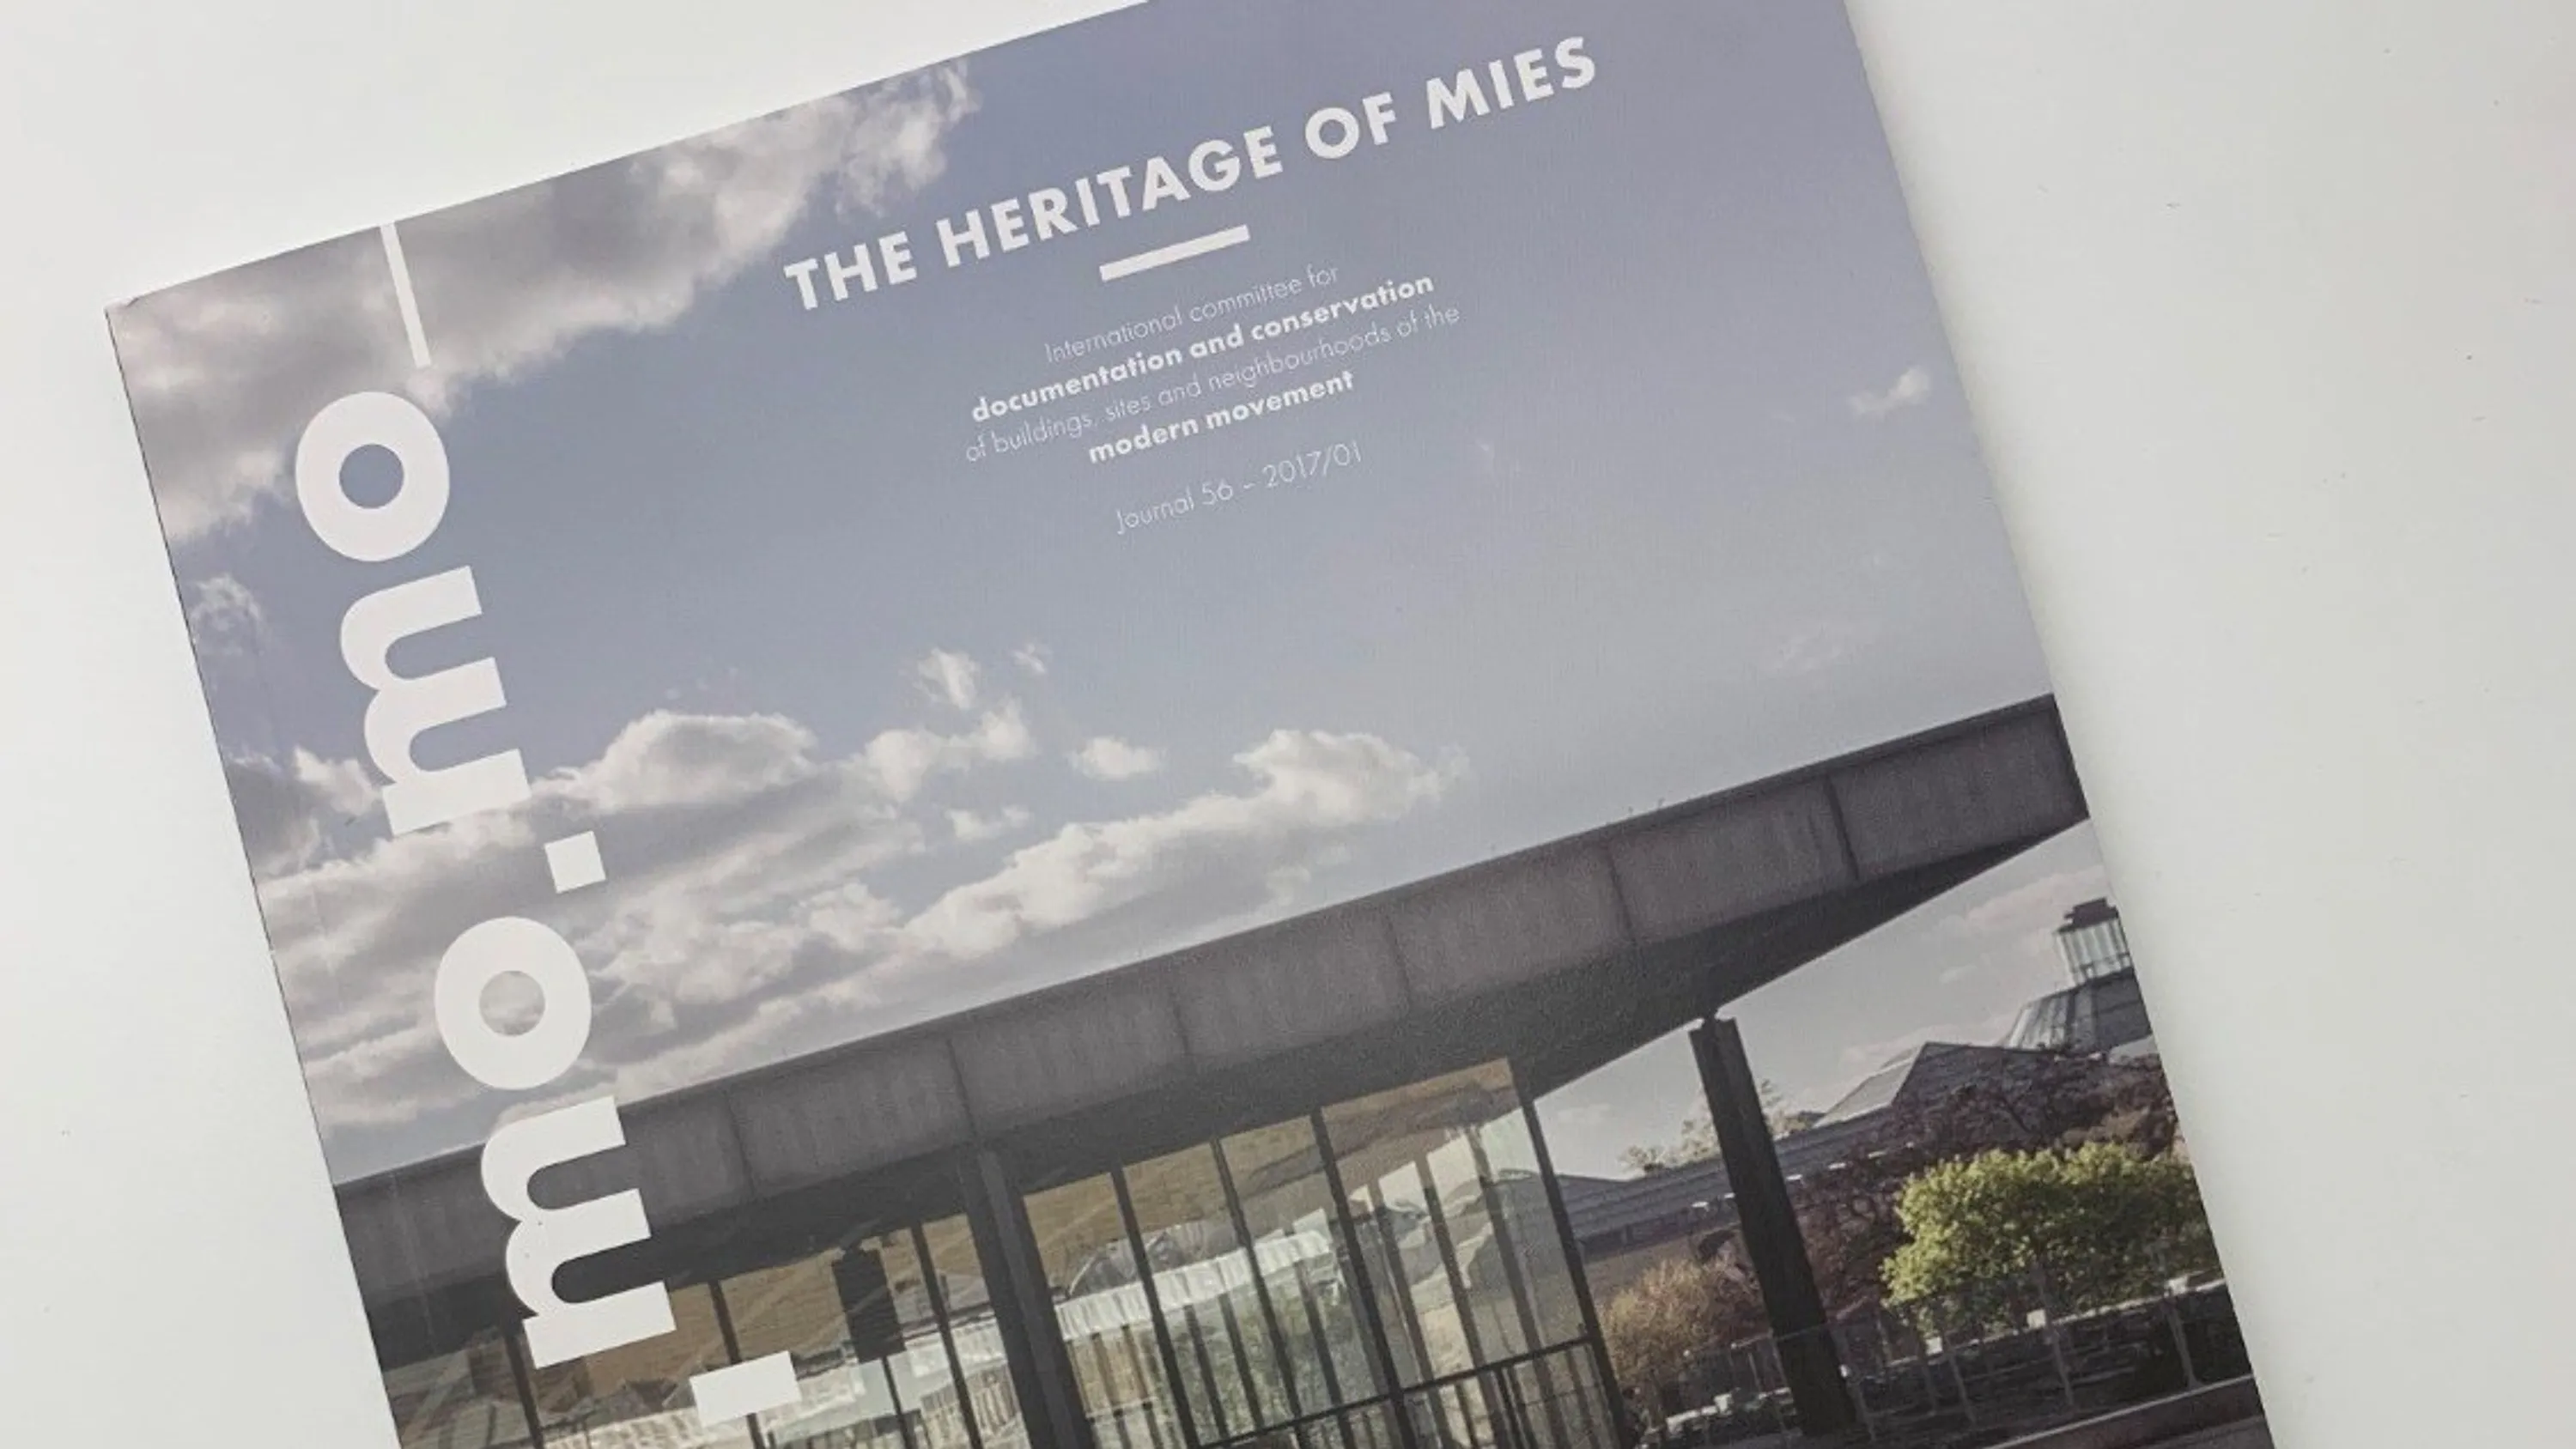 More copies of DOCOMOMO The Heritage of Mies in print Thumbnail